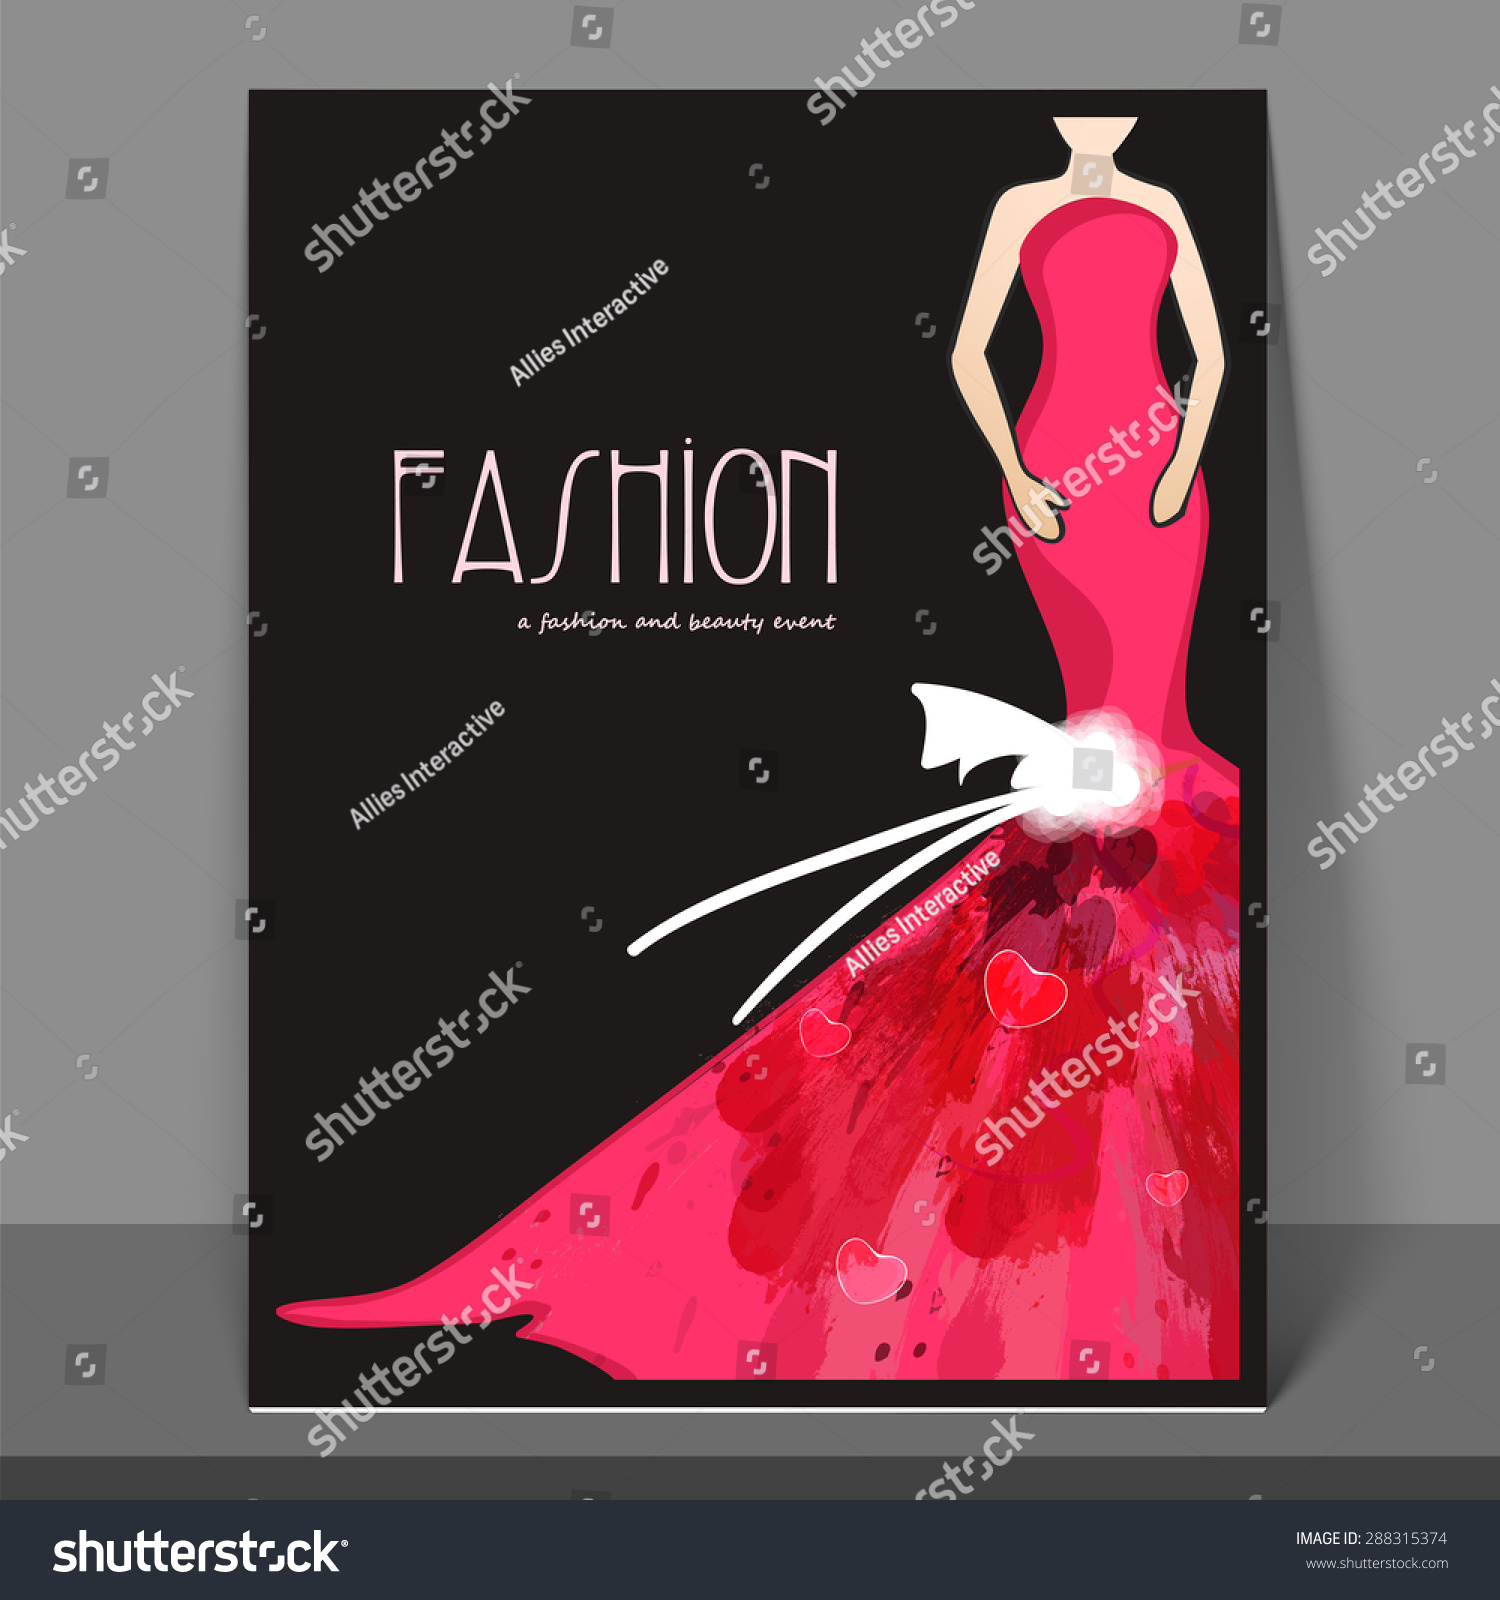 Stylish Fashion Flyer Banner Template Design Stock Vector Royalty Free